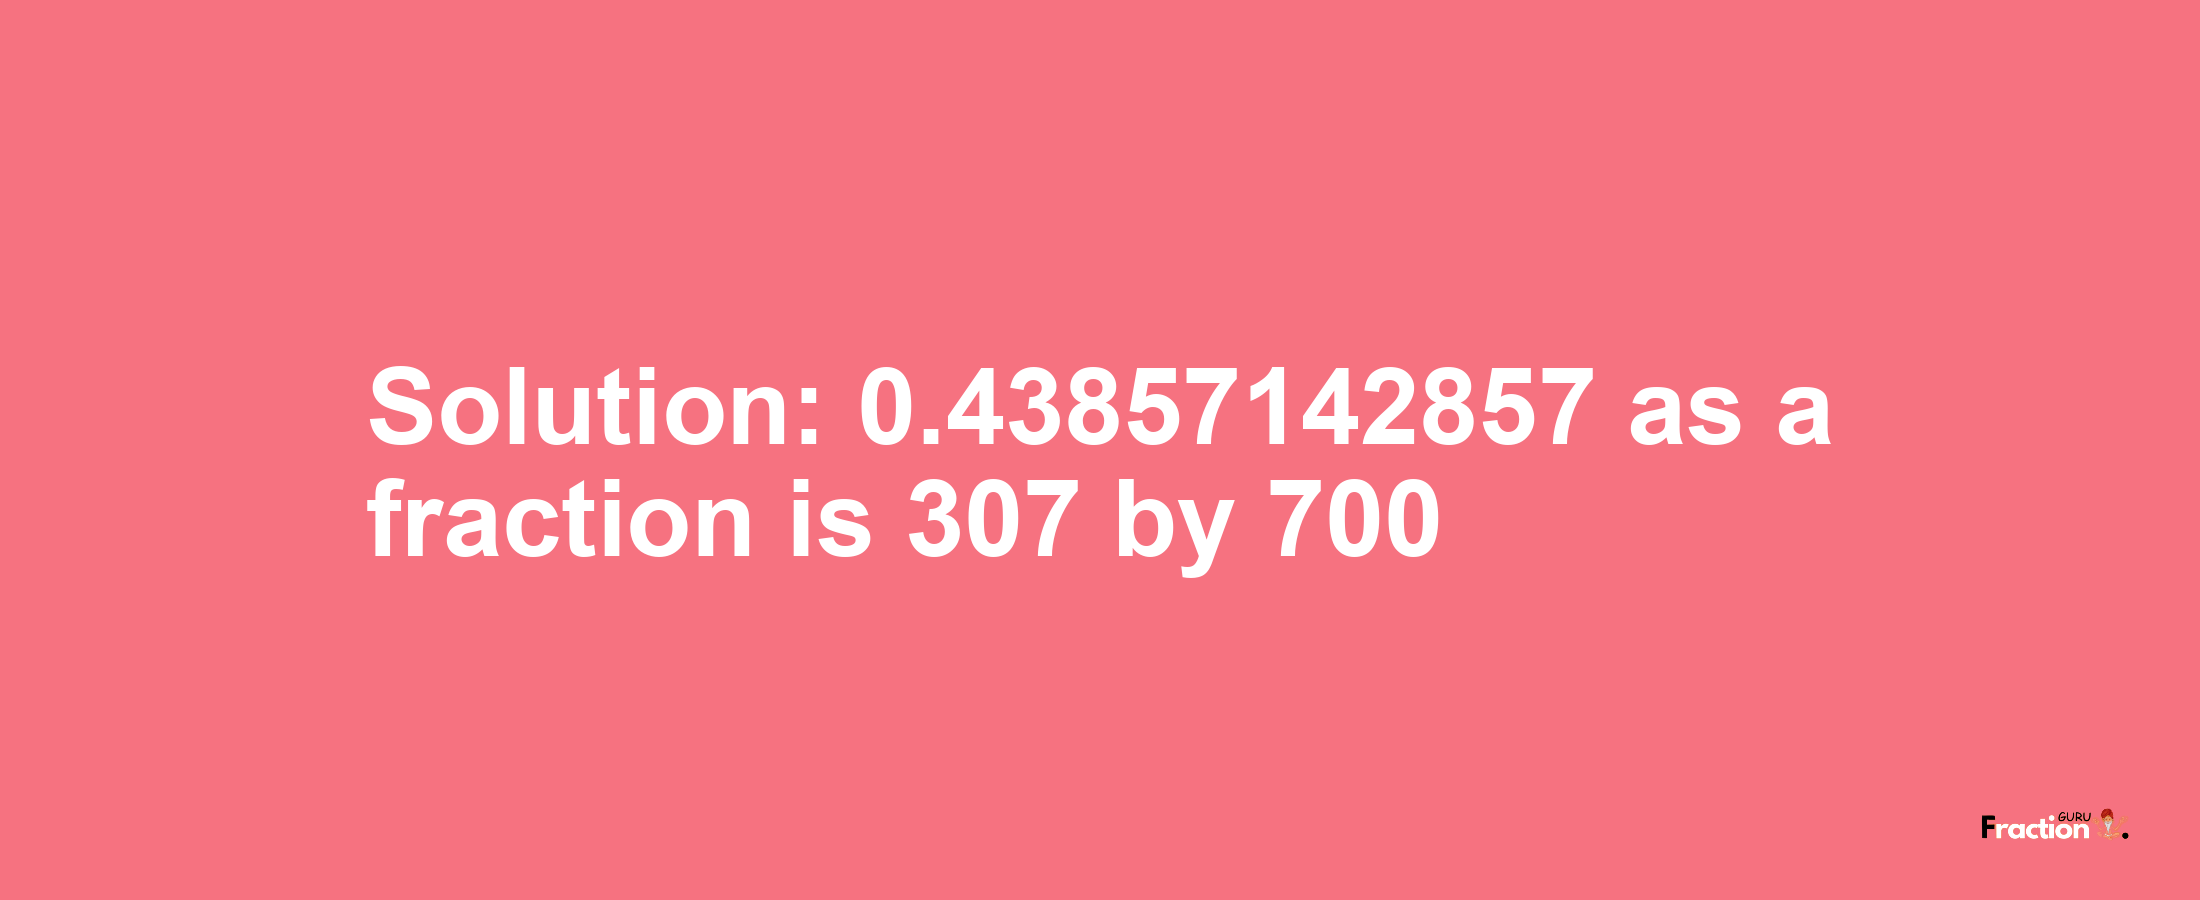 Solution:0.43857142857 as a fraction is 307/700